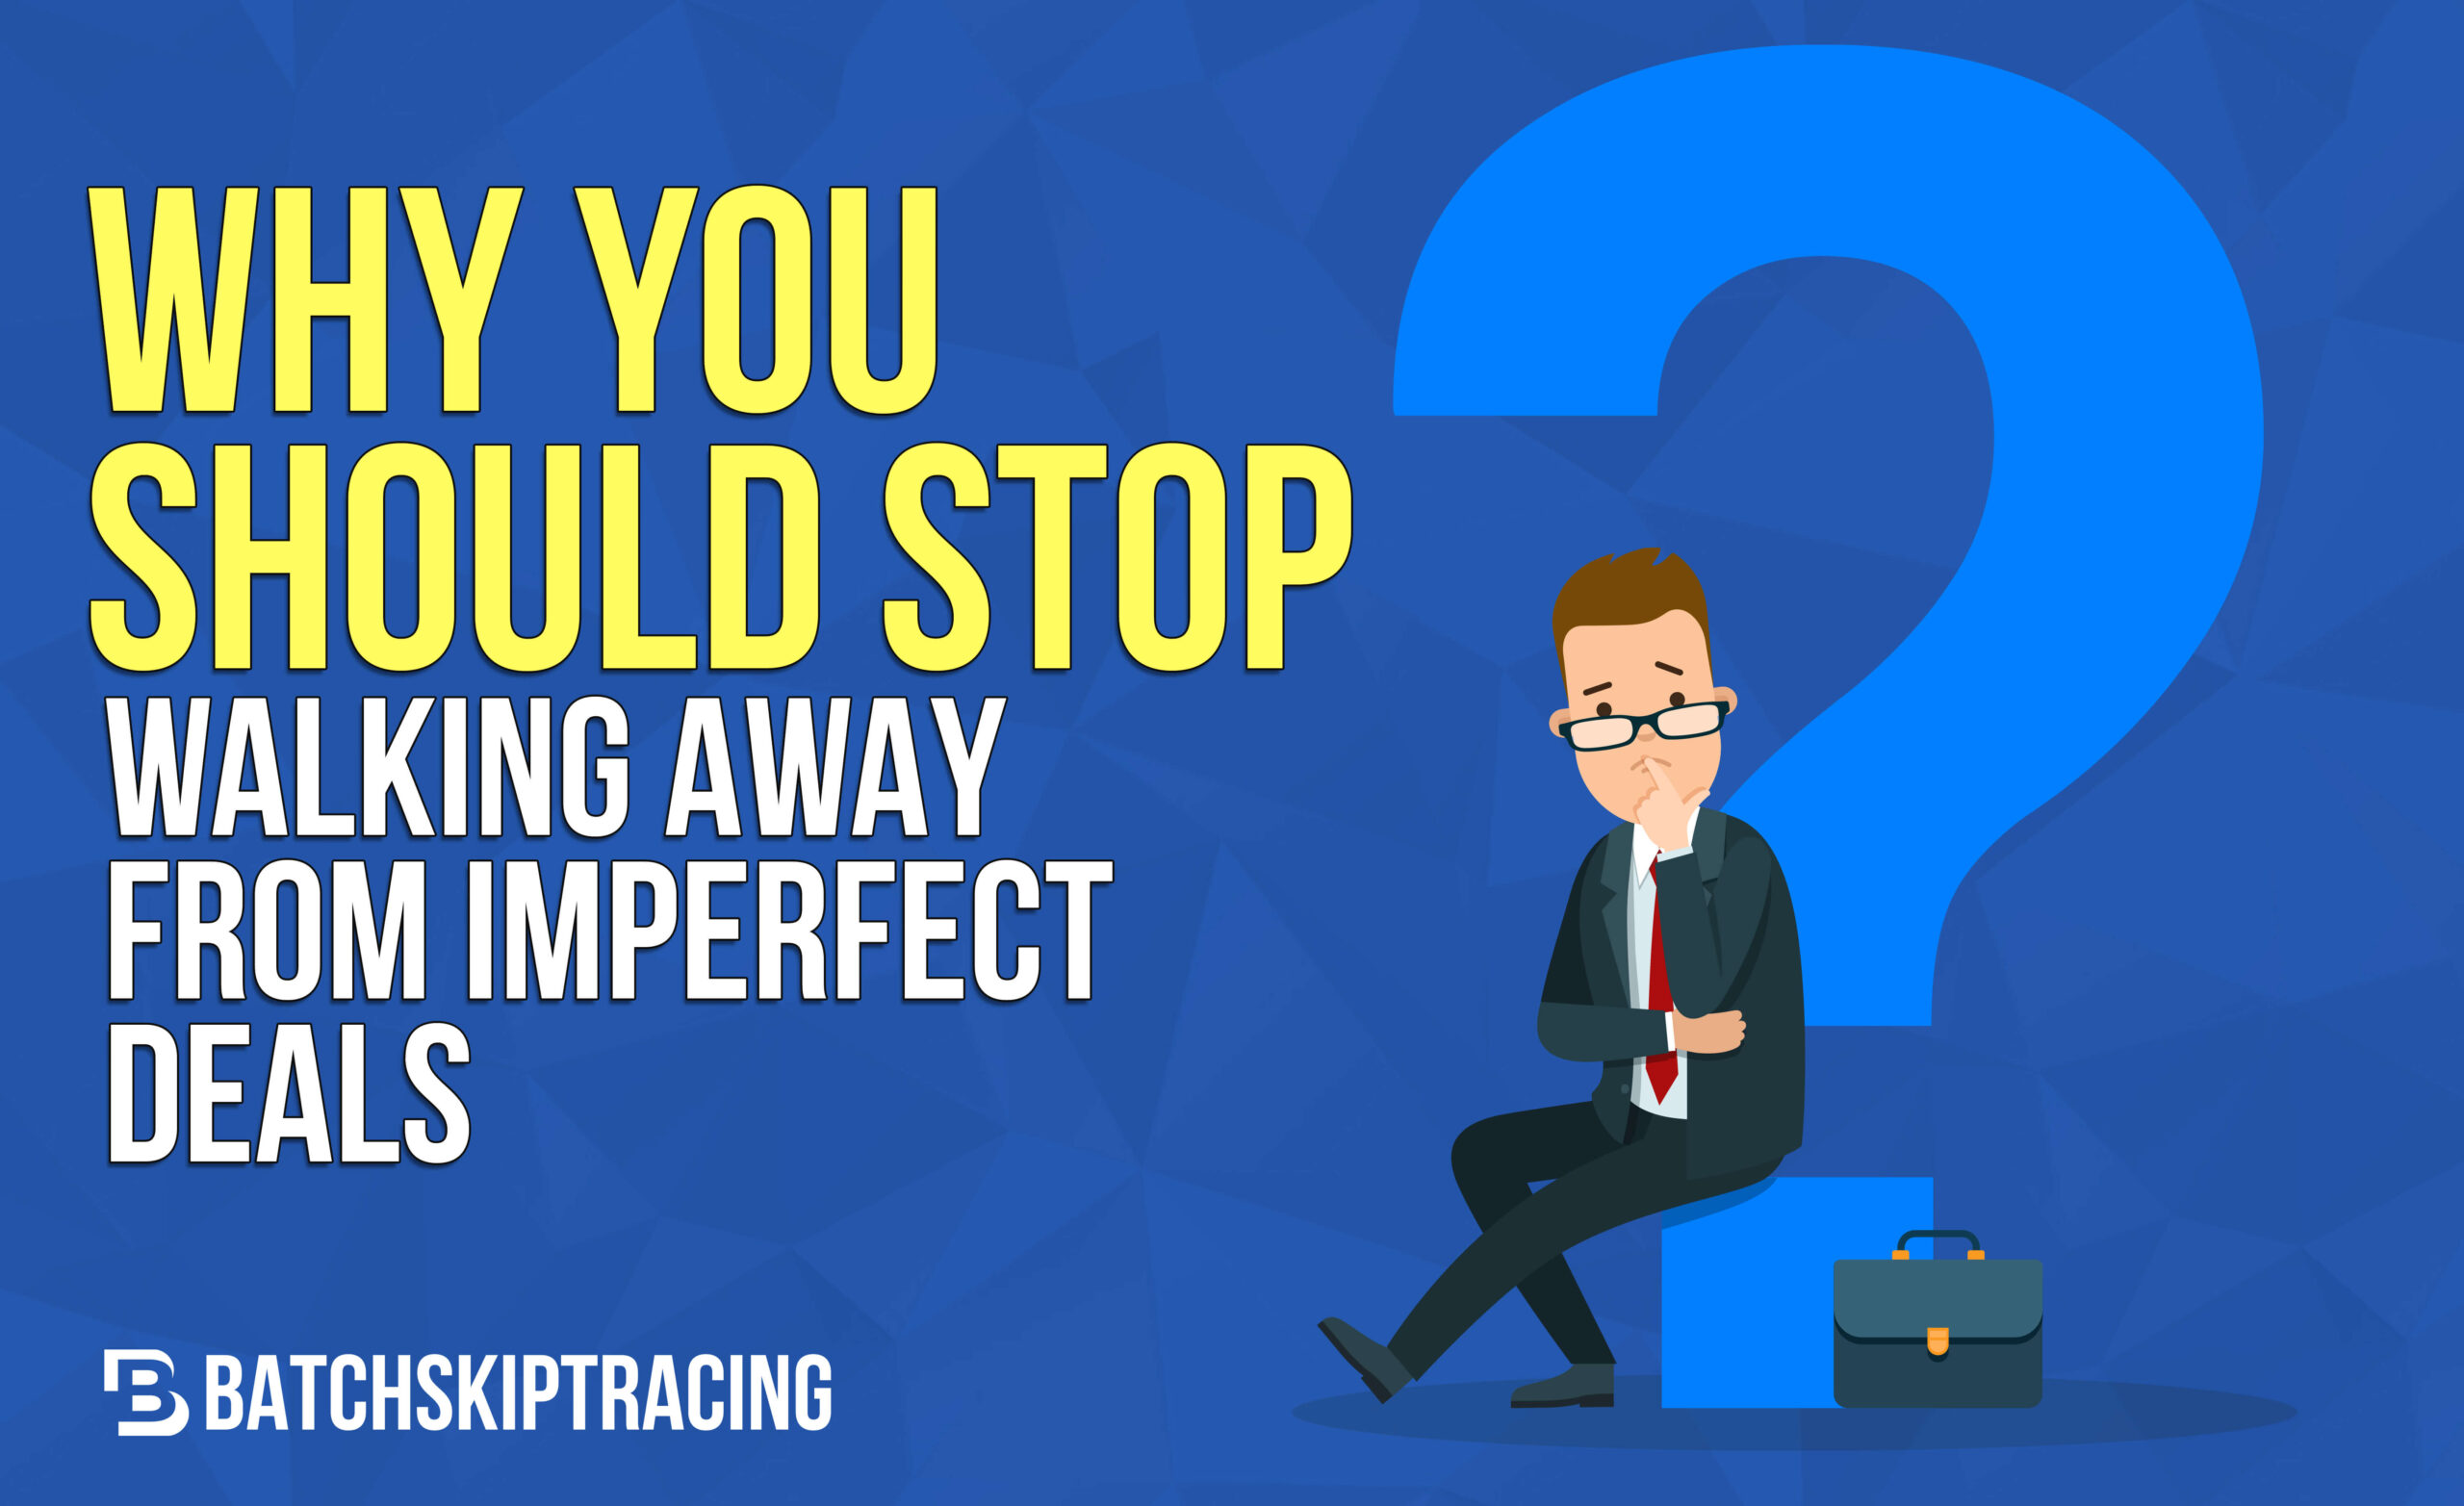 Why You Should Stop Walking Away from Imperfect Deals